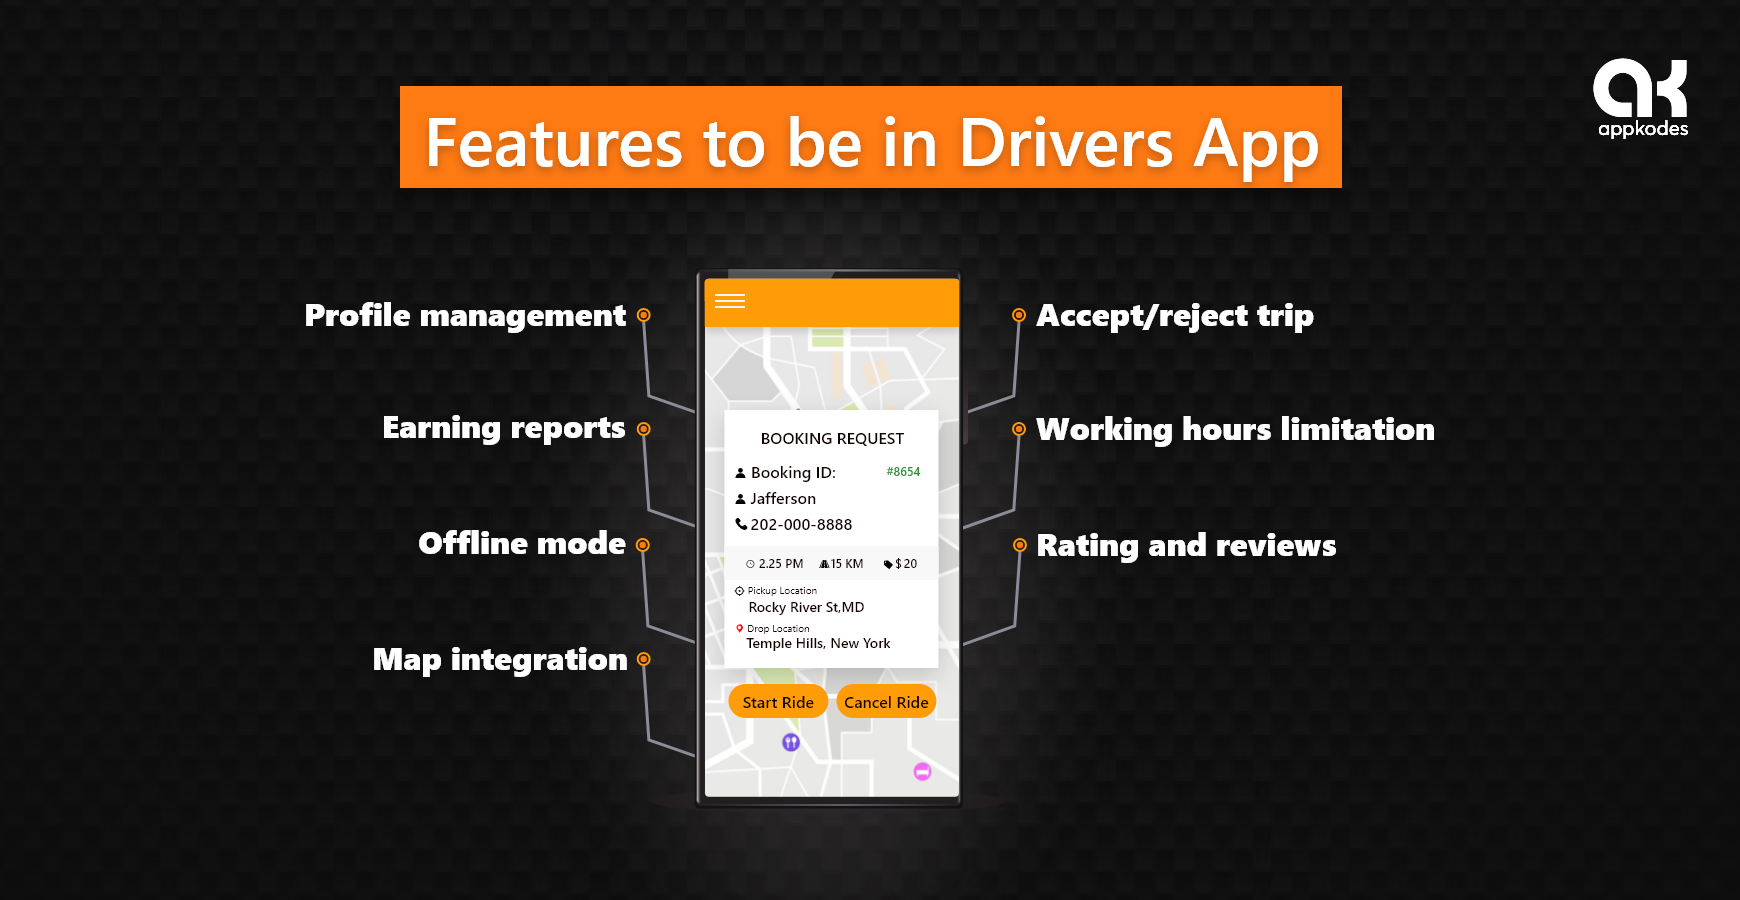 Features to be in Drivers App